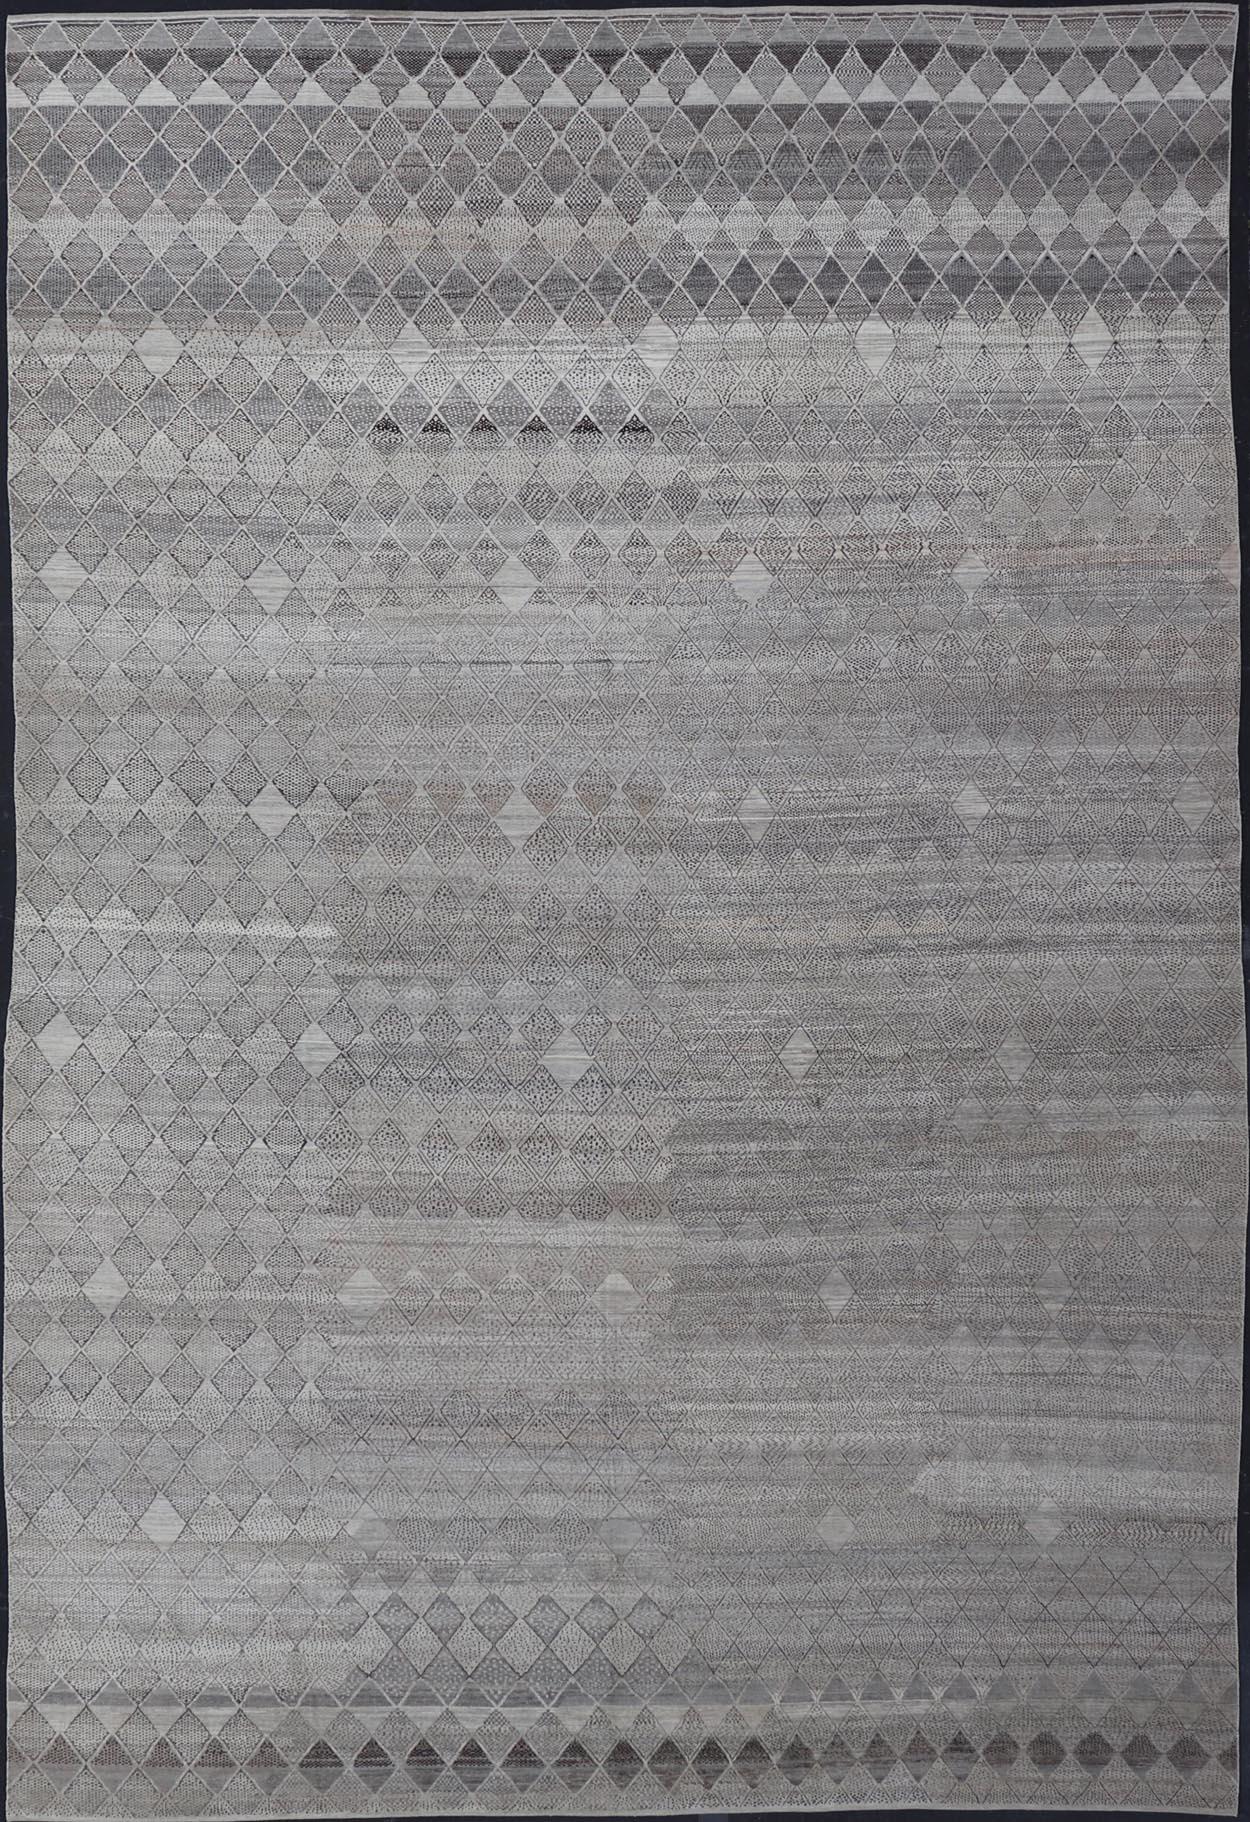 Very Large Modern Rug with Diamond Design in Gray, Taupe & Earth Tones